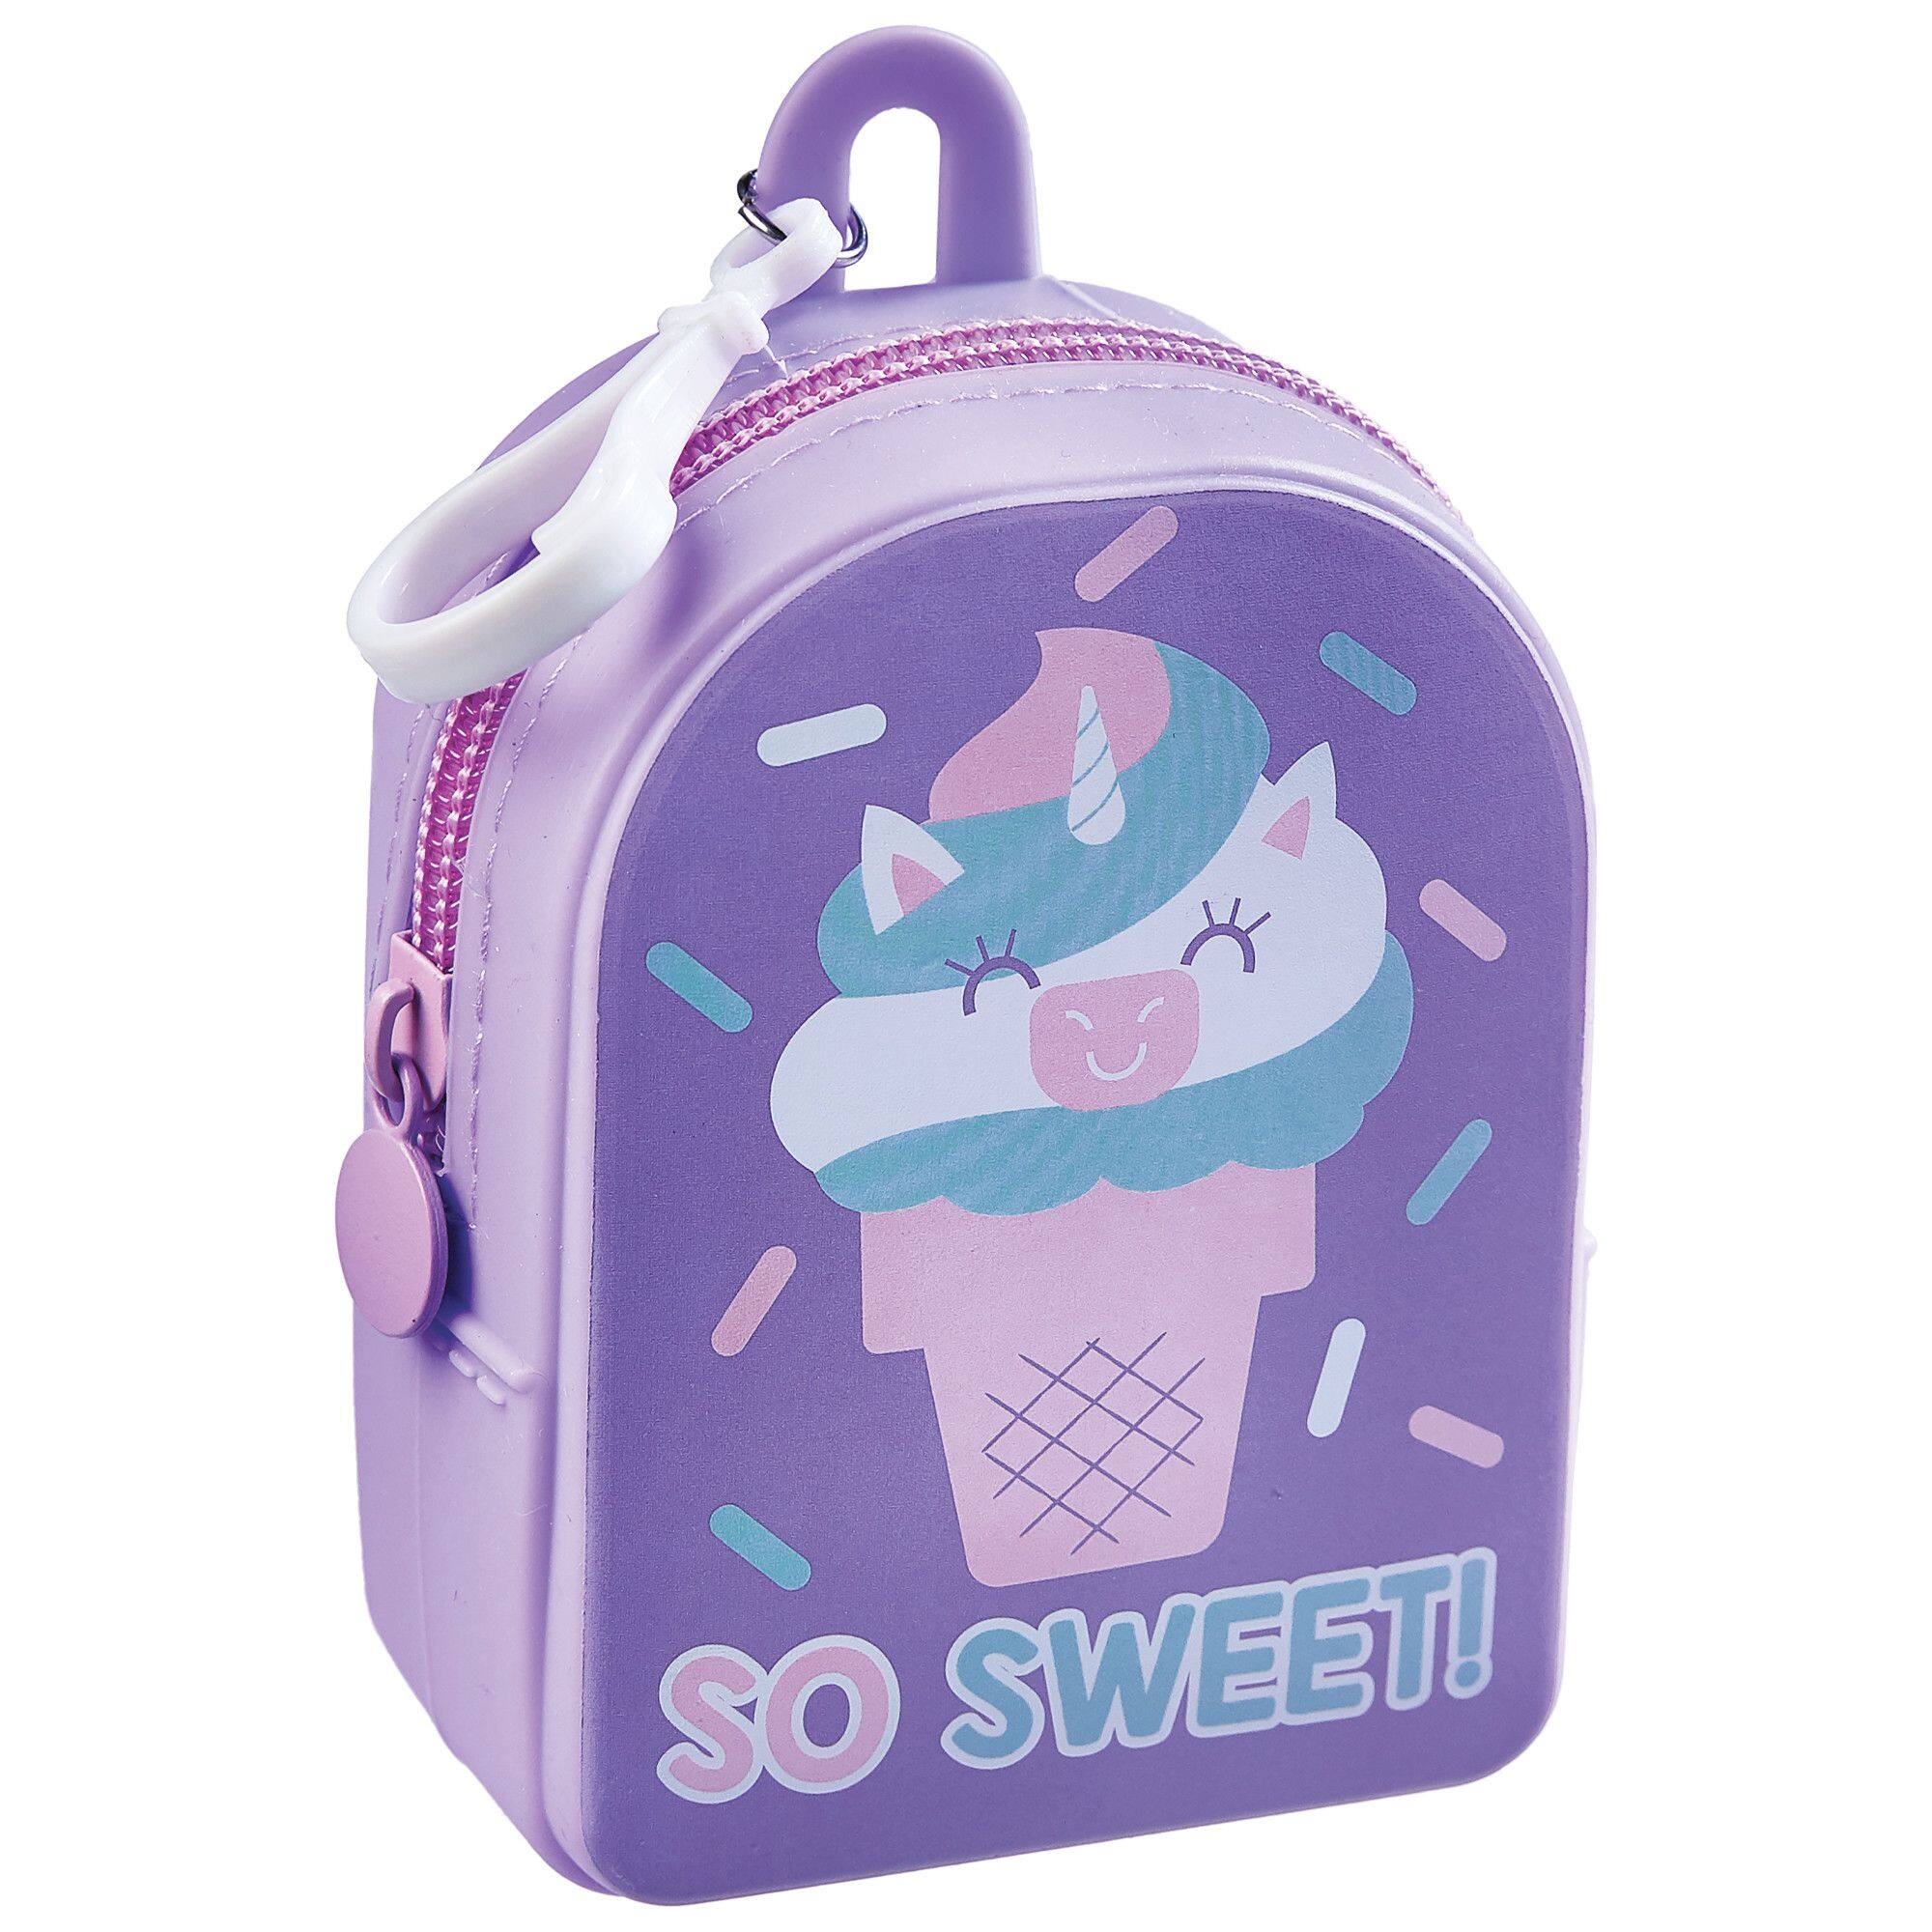 https://media-www.canadiantire.ca/product/automotive/party-city-everyday/party-city-fun/8539493/ice-cream-silicone-backpack-clip-5cb9f99d-3a84-4454-9531-d5284a38dd96-jpgrendition.jpg